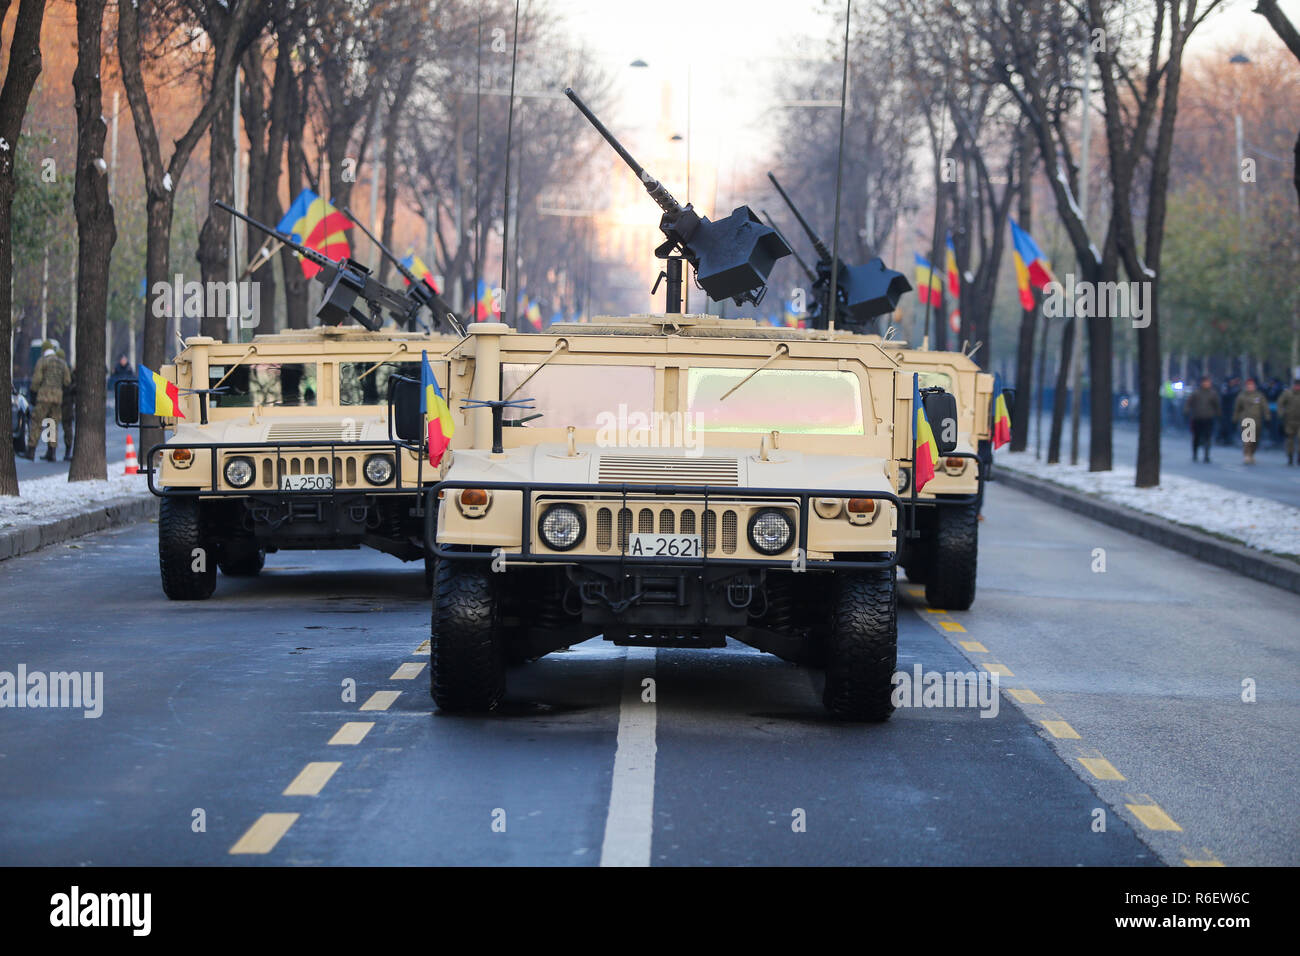 BUCHAREST, ROMANIA - December 1, 2018: Humvee military vehicle from the Romanian army at Romanian National Day military parade Stock Photo